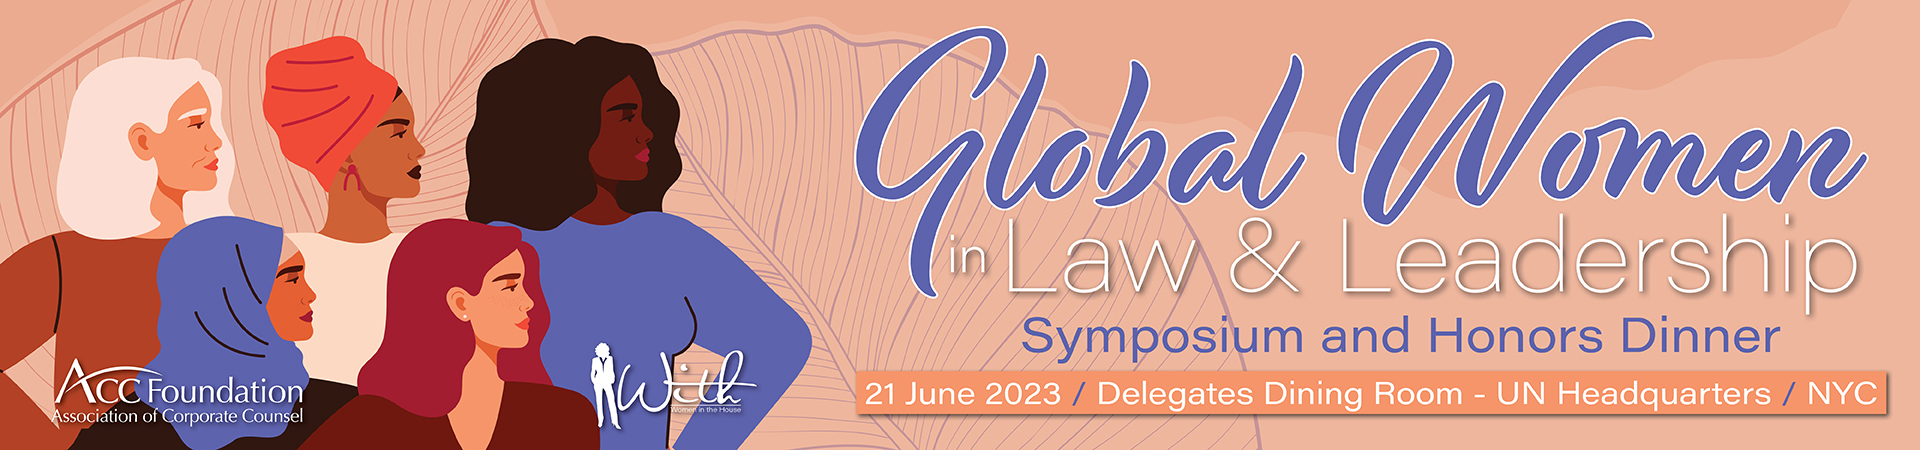 Global Women in Law & Leadership Symposium and Honors Dinner 21 June 2023 Delegates Dining Room UN Headquarters NYC